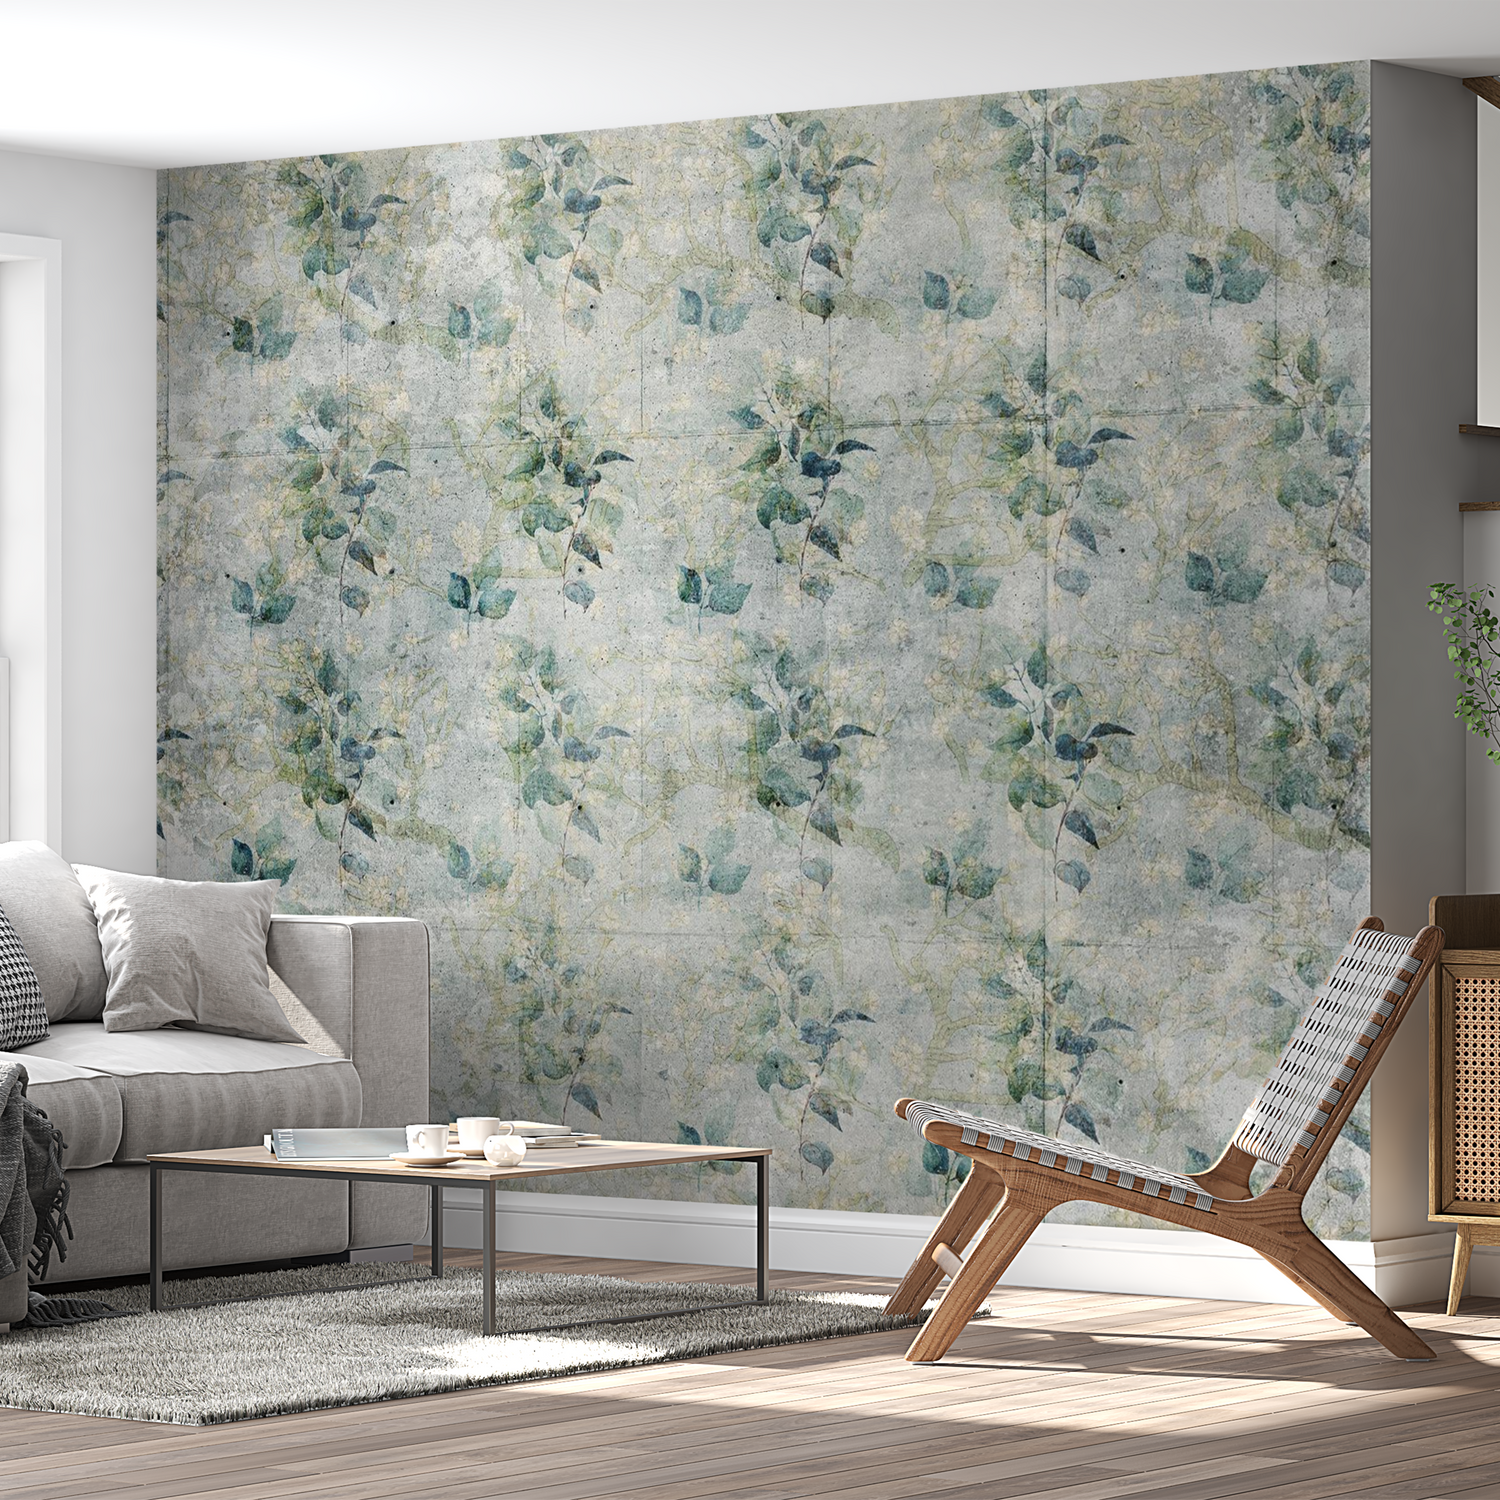 Peel & Stick Botanical Wall Mural - Green Leaf Bouquets - Removable Wallpaper 38"Wx27"H